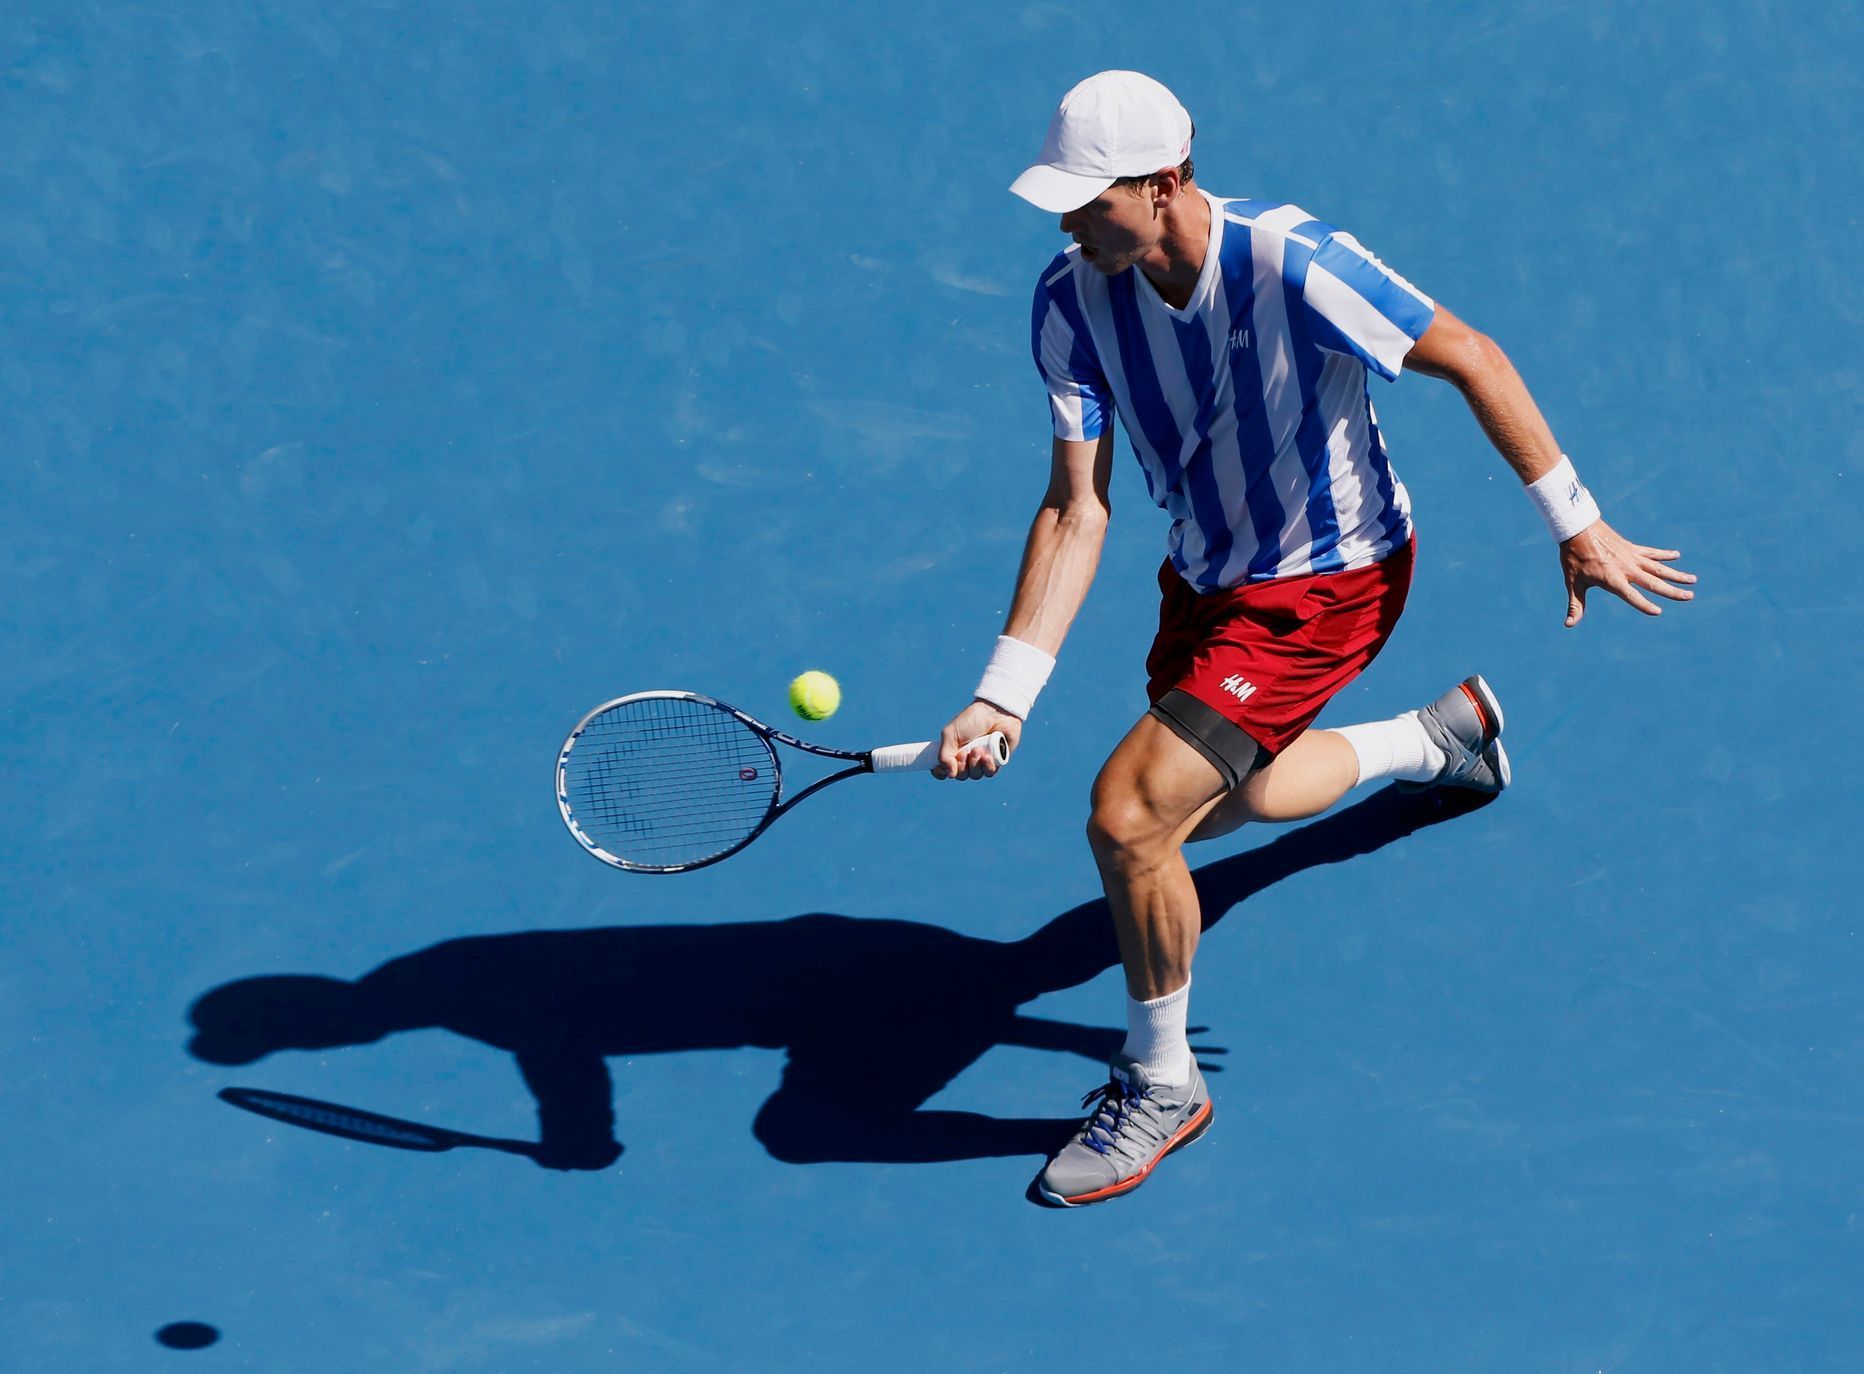 Tomas Berdych of the Czech Republic hits a return to Damir Dzumhur of Bosnia and Herzegovina during their men's singles match at the Australian Open 2014 tennis tournament in Melbourne